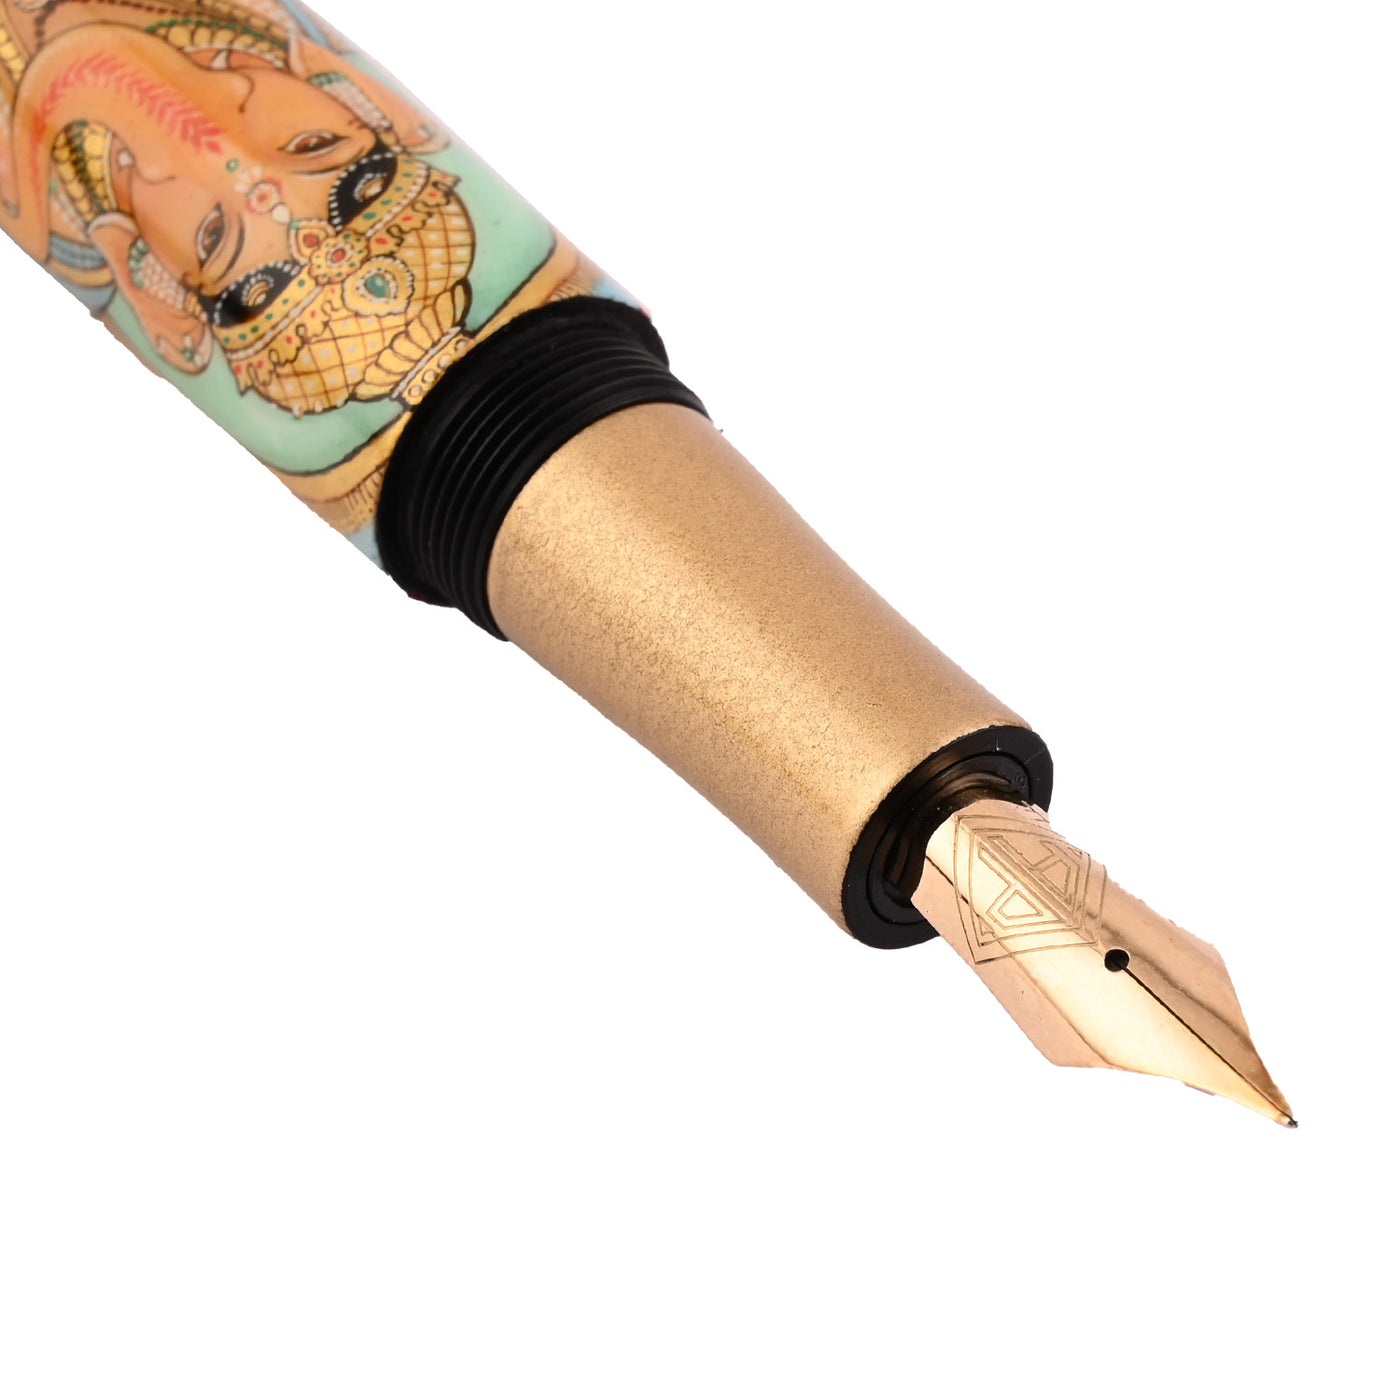 AP Limited Editions Russian Lacquer Art Fountain Pen - Ganesha (Limited Edition) 4